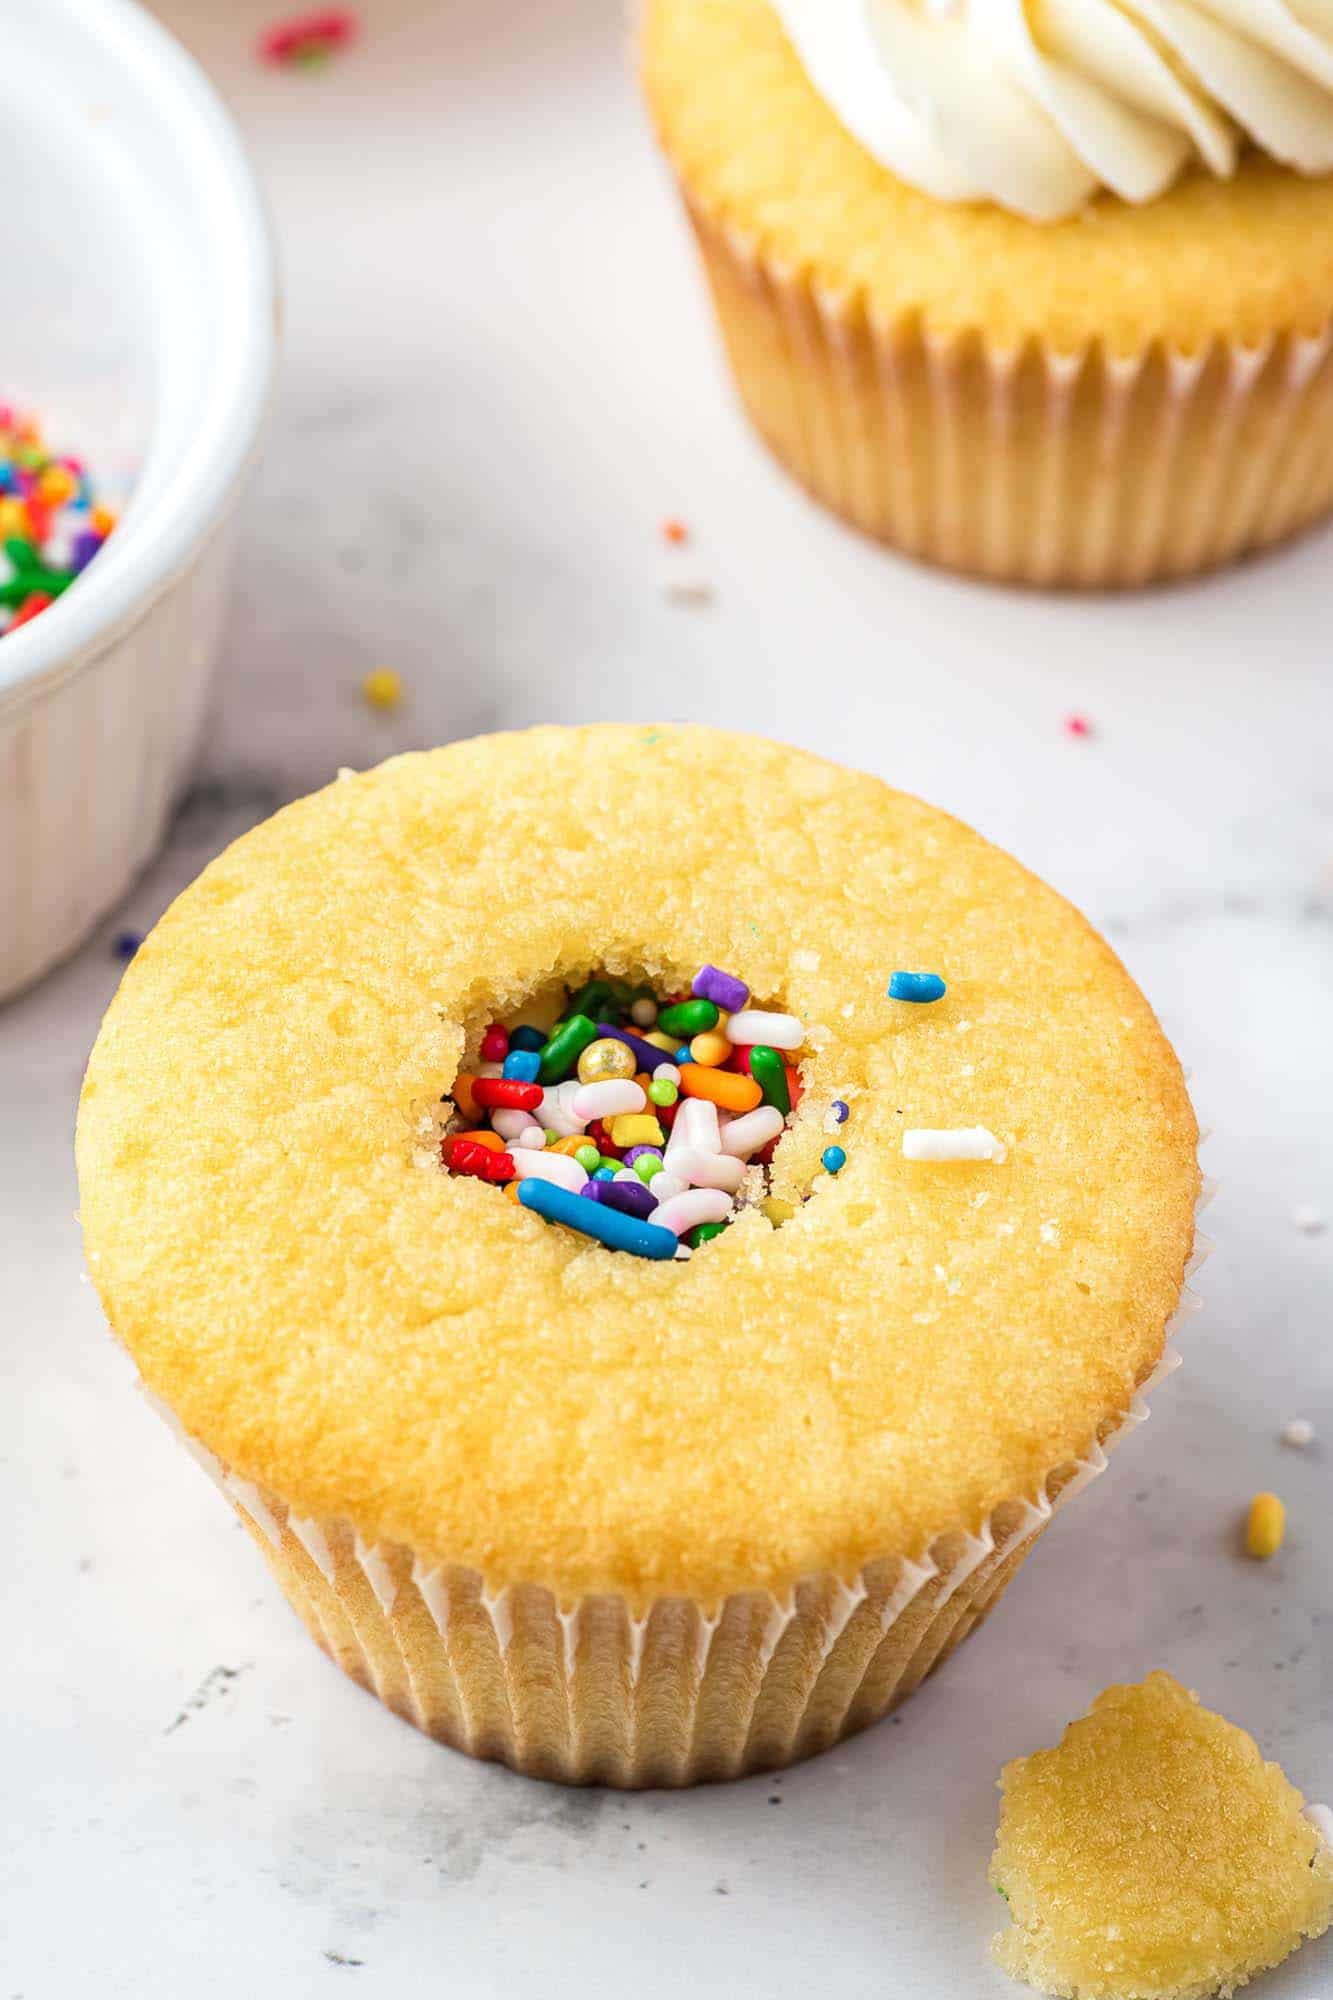 Vanilla cupcake cored and filled with sprinkles